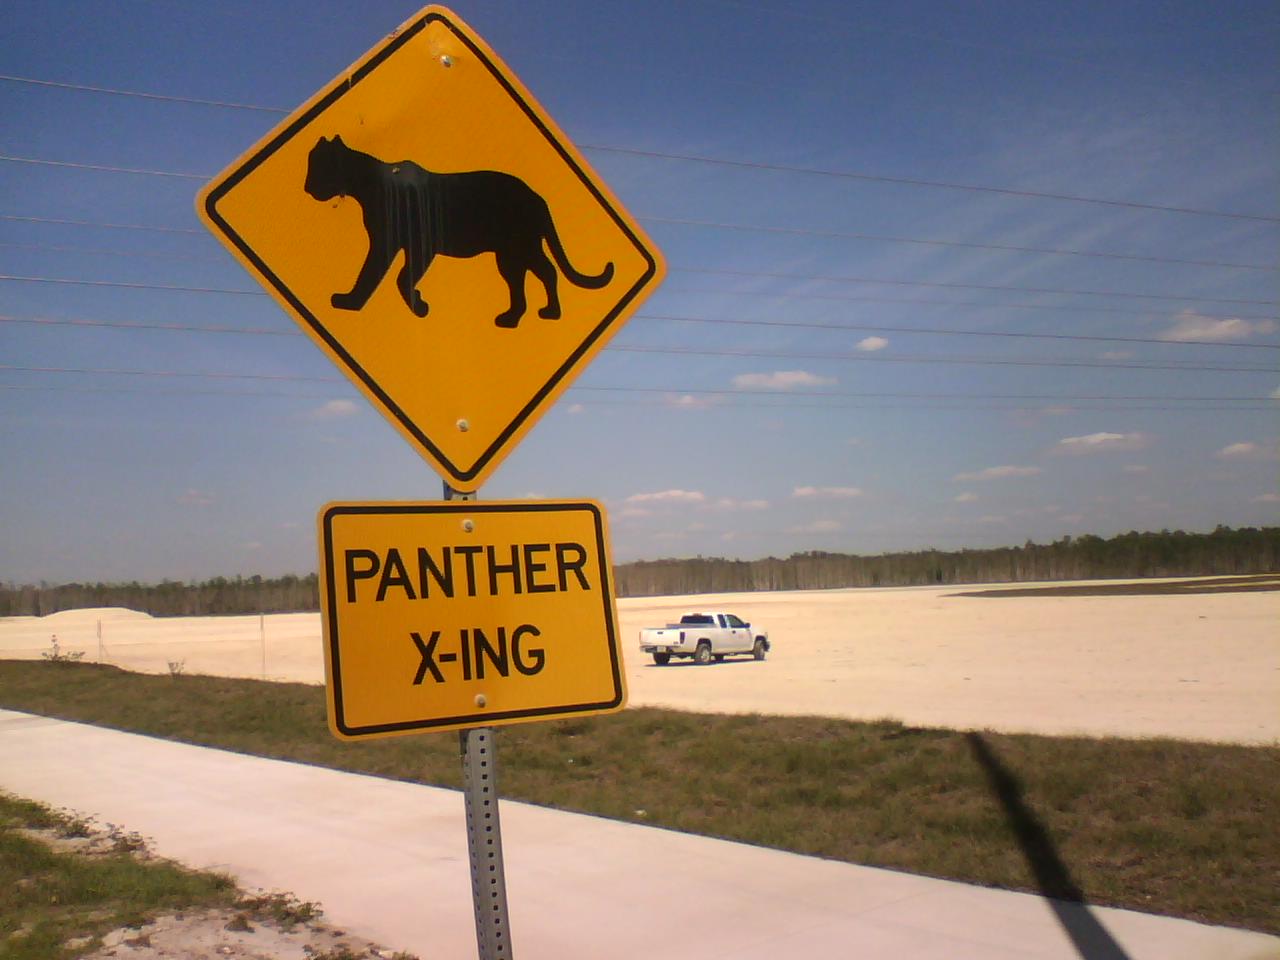 Why does the panther cross the road